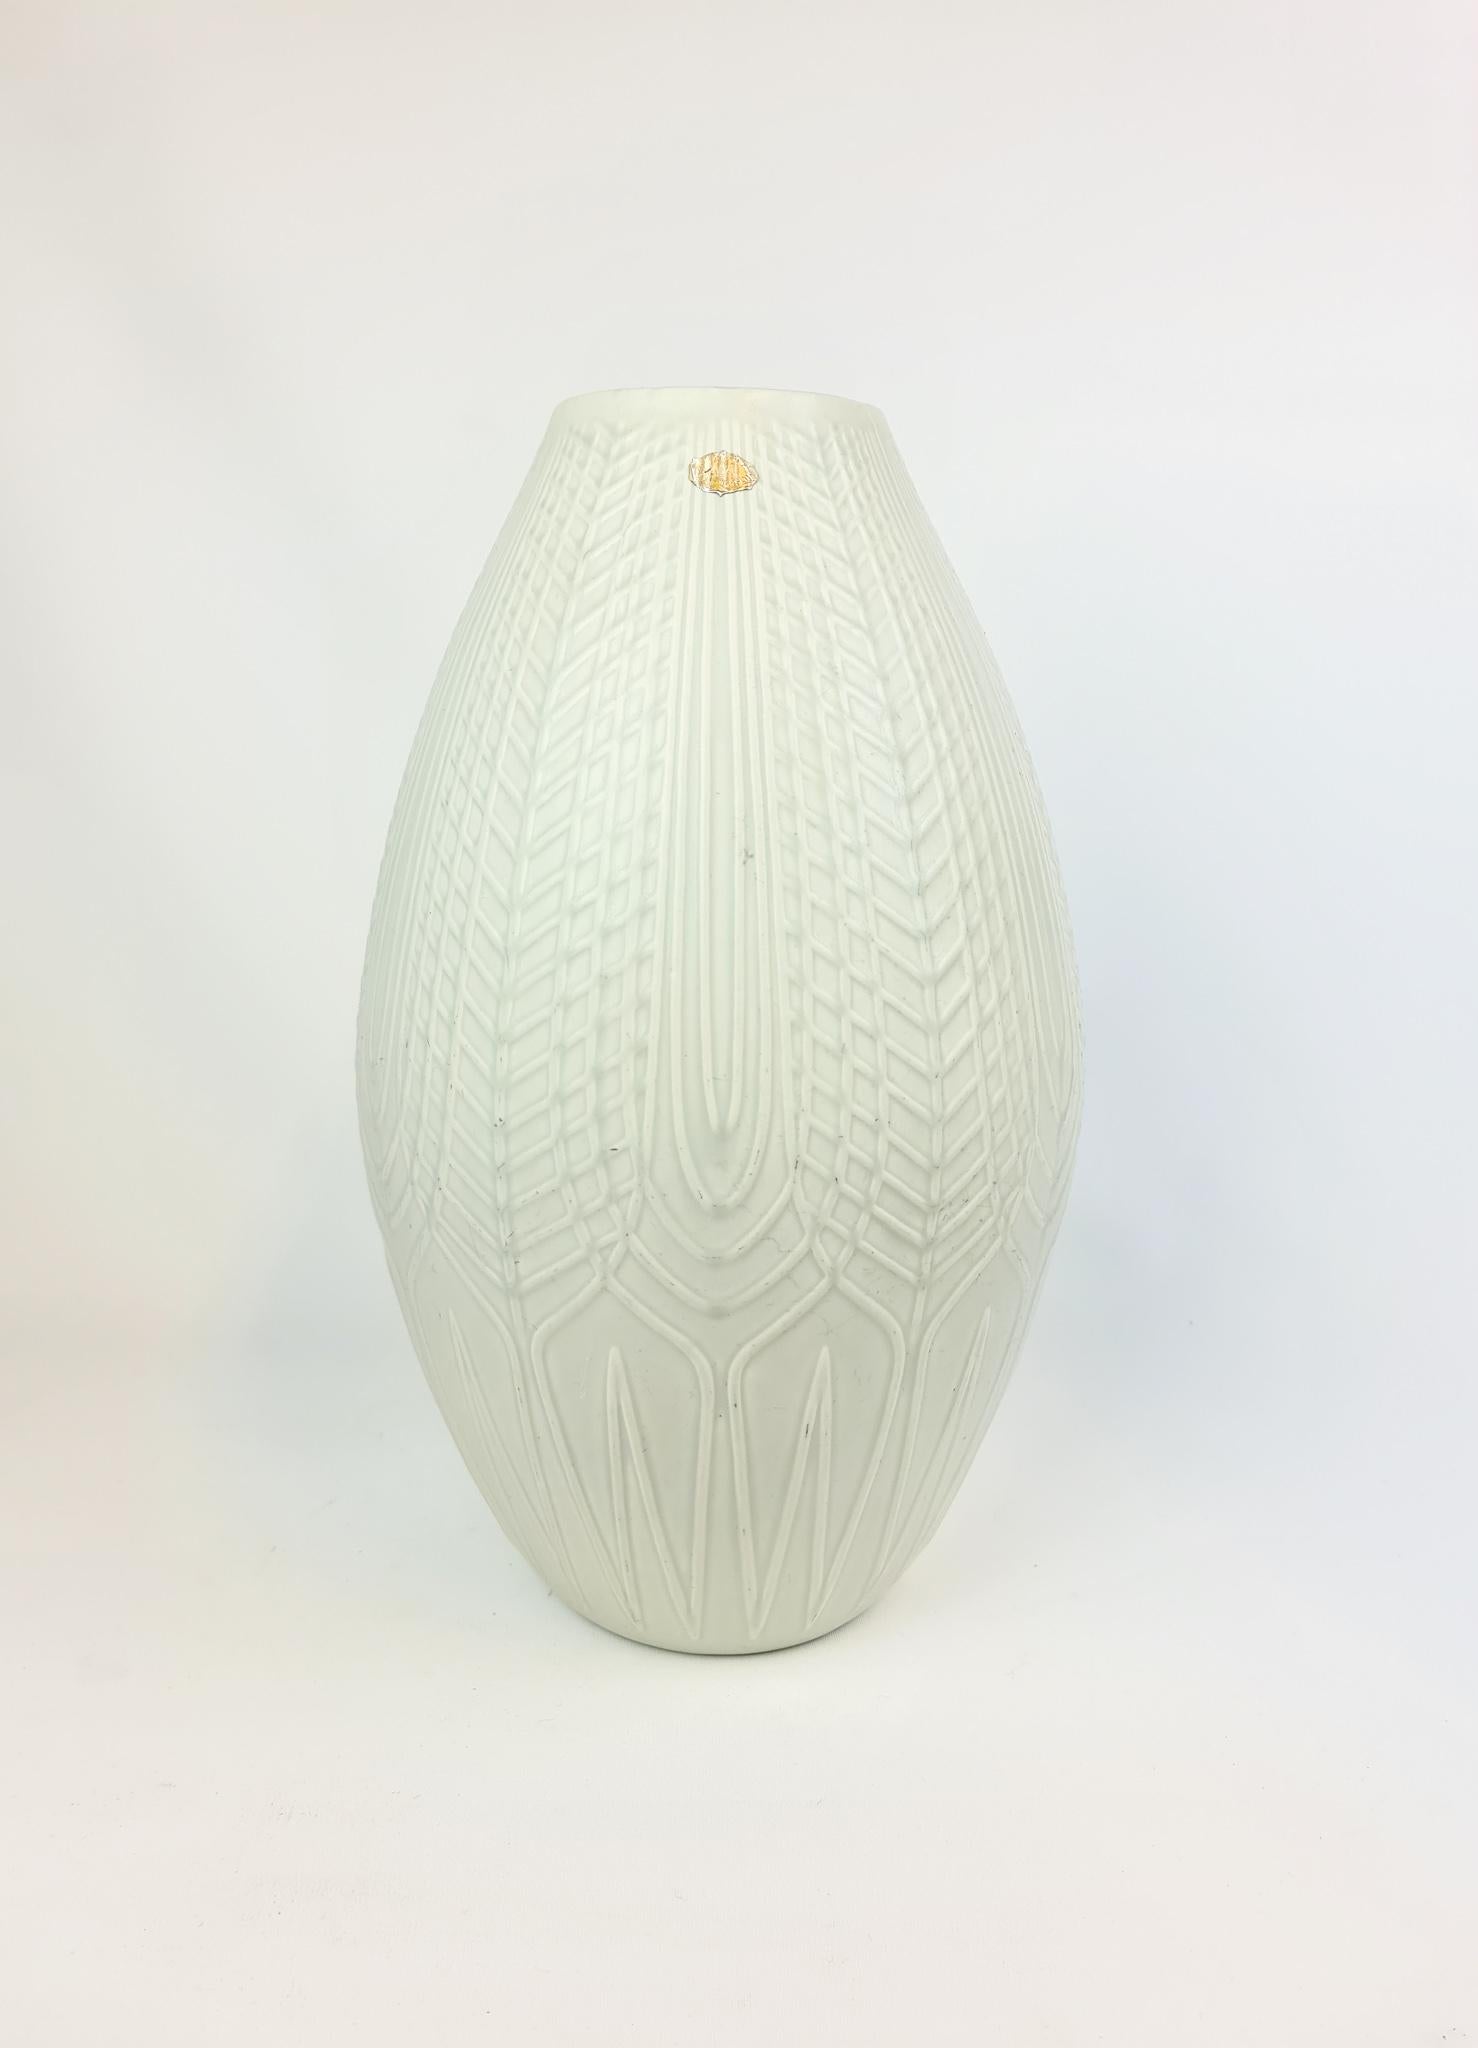 Wonderful floor vase. Produced at Gefle/Upsala Ekeby and designed by Berit Ternell in the 1950s. The form and pattern are nice put together. 

Good vintage condition.

Measures: H 41 cm, D 22 cm.
 